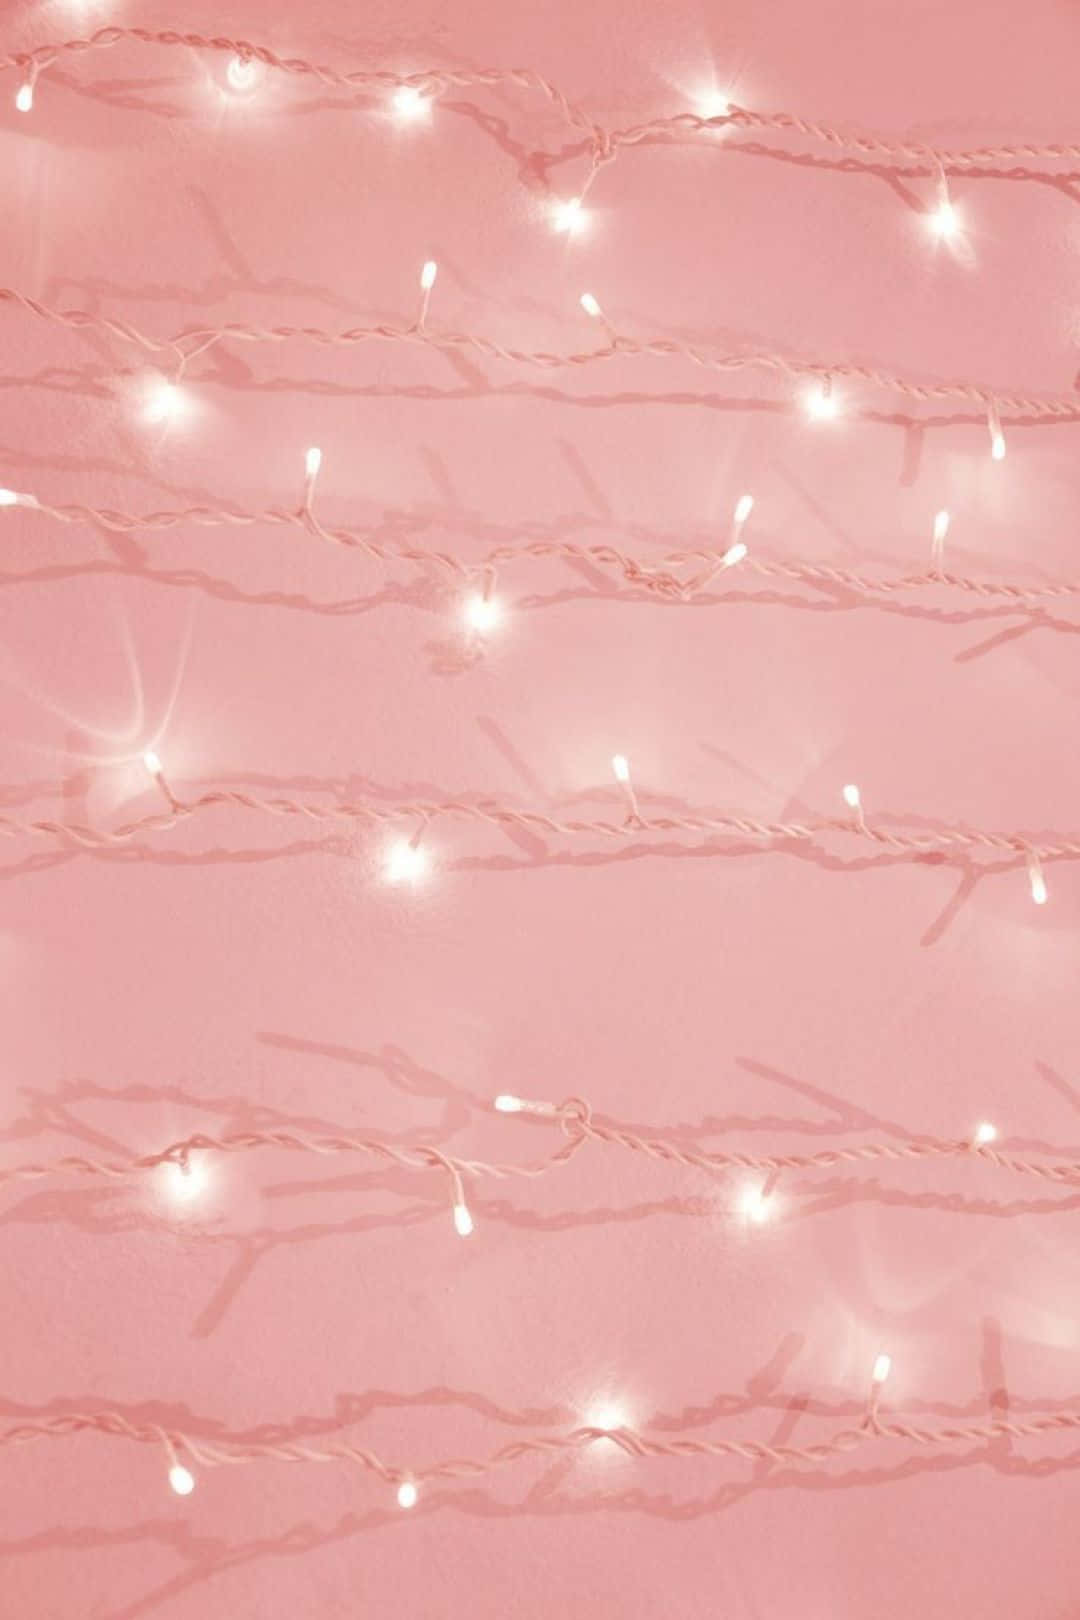 Celebrate your unique style with this vibrant and bright tumblr pink background